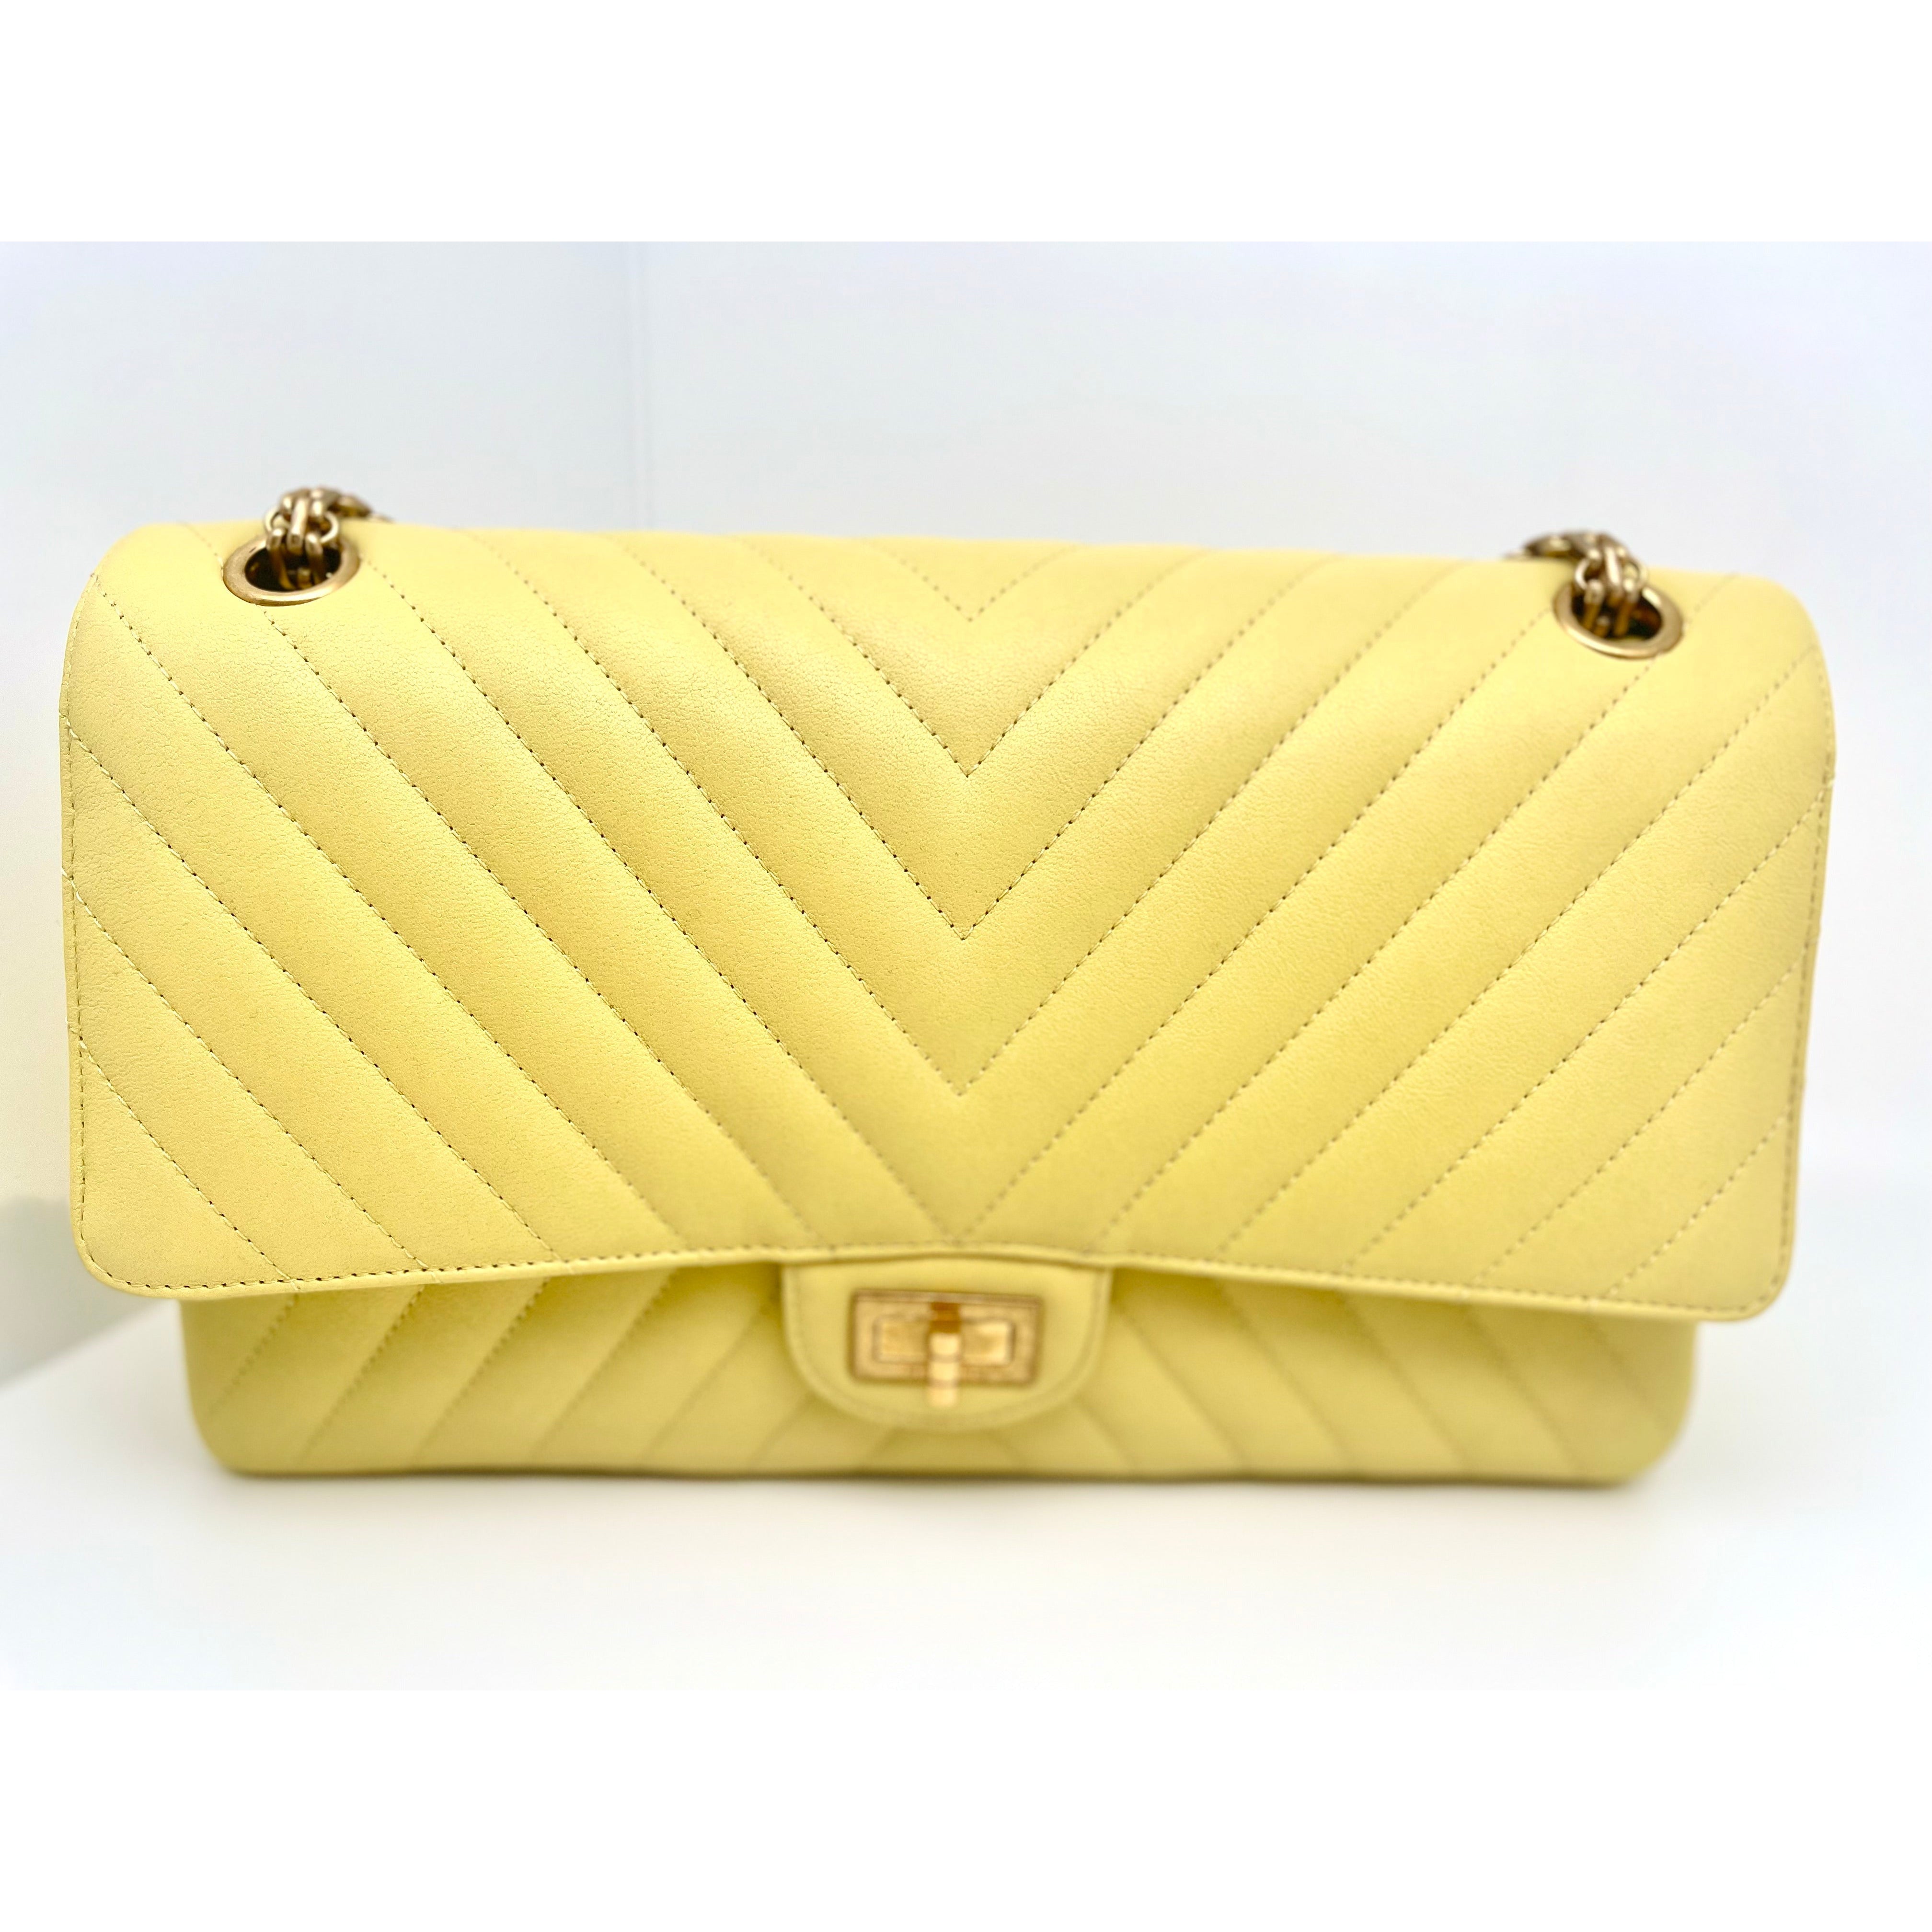 Chanel Yellow and Coral Shoulder 2.55 Re-Issue Bag